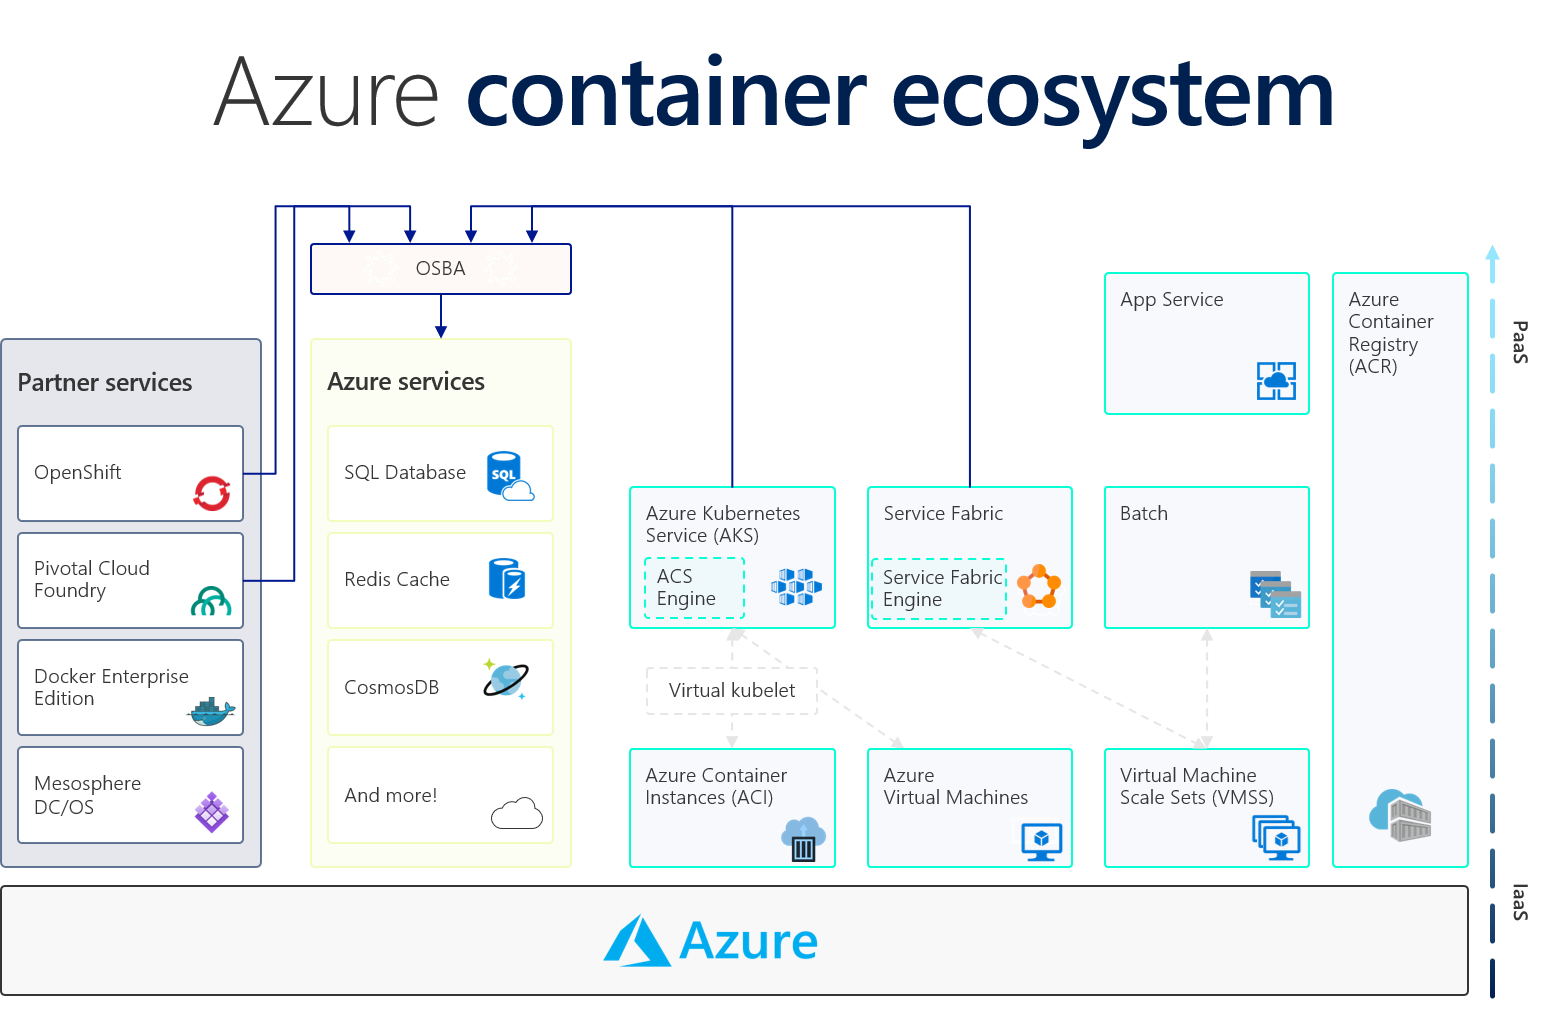 Diagram of the container ecosystem in Azure.